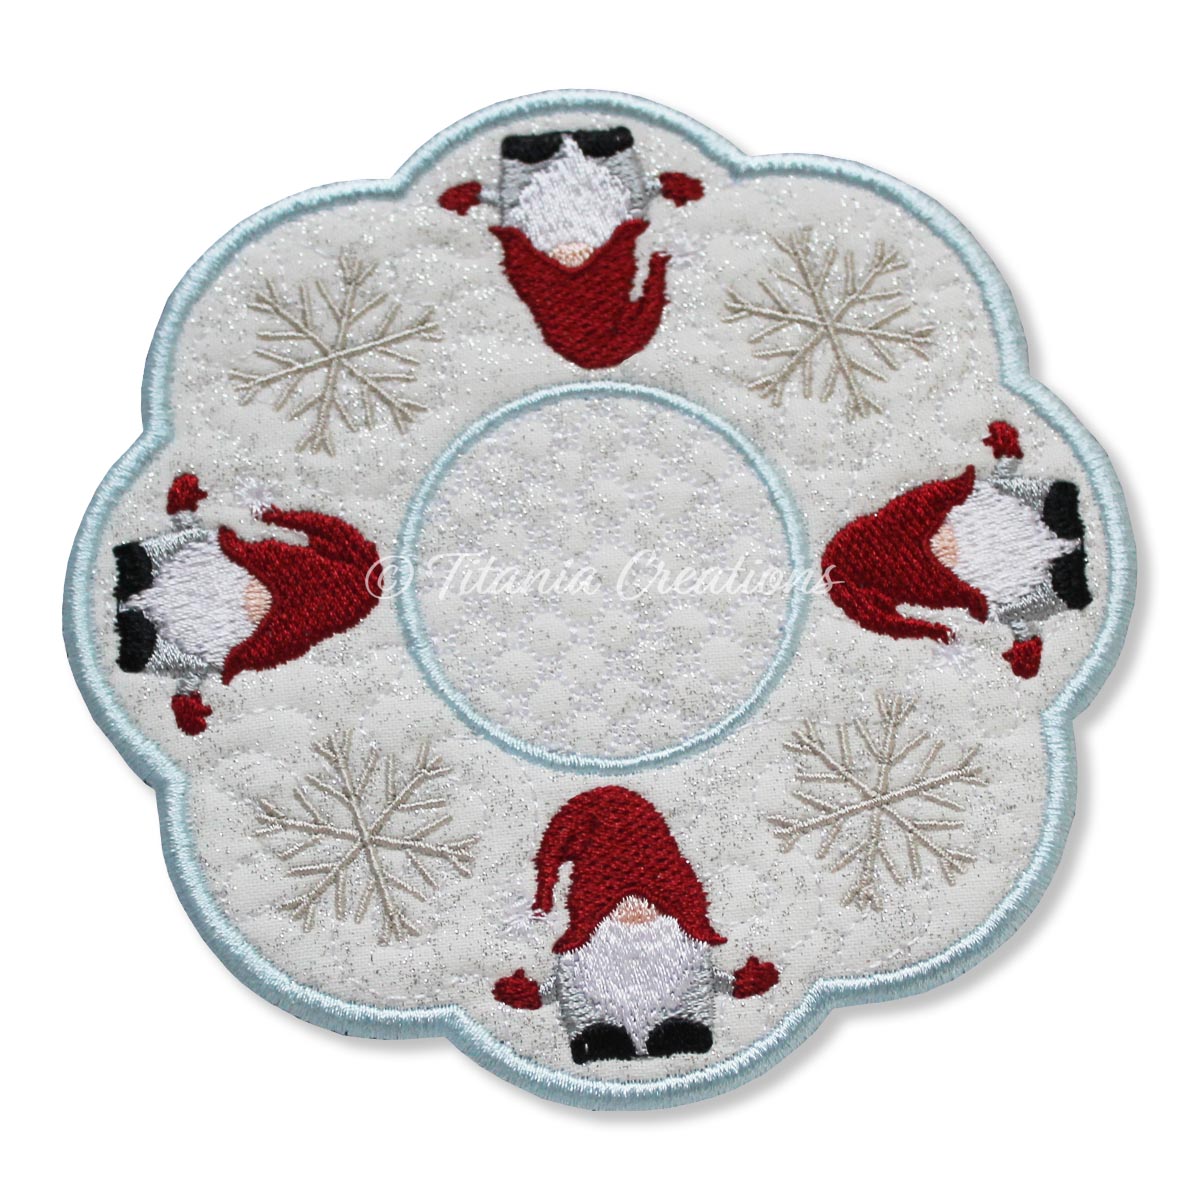 ITH Gnome Candle Mat 5x5 6x6 7x7 8x8